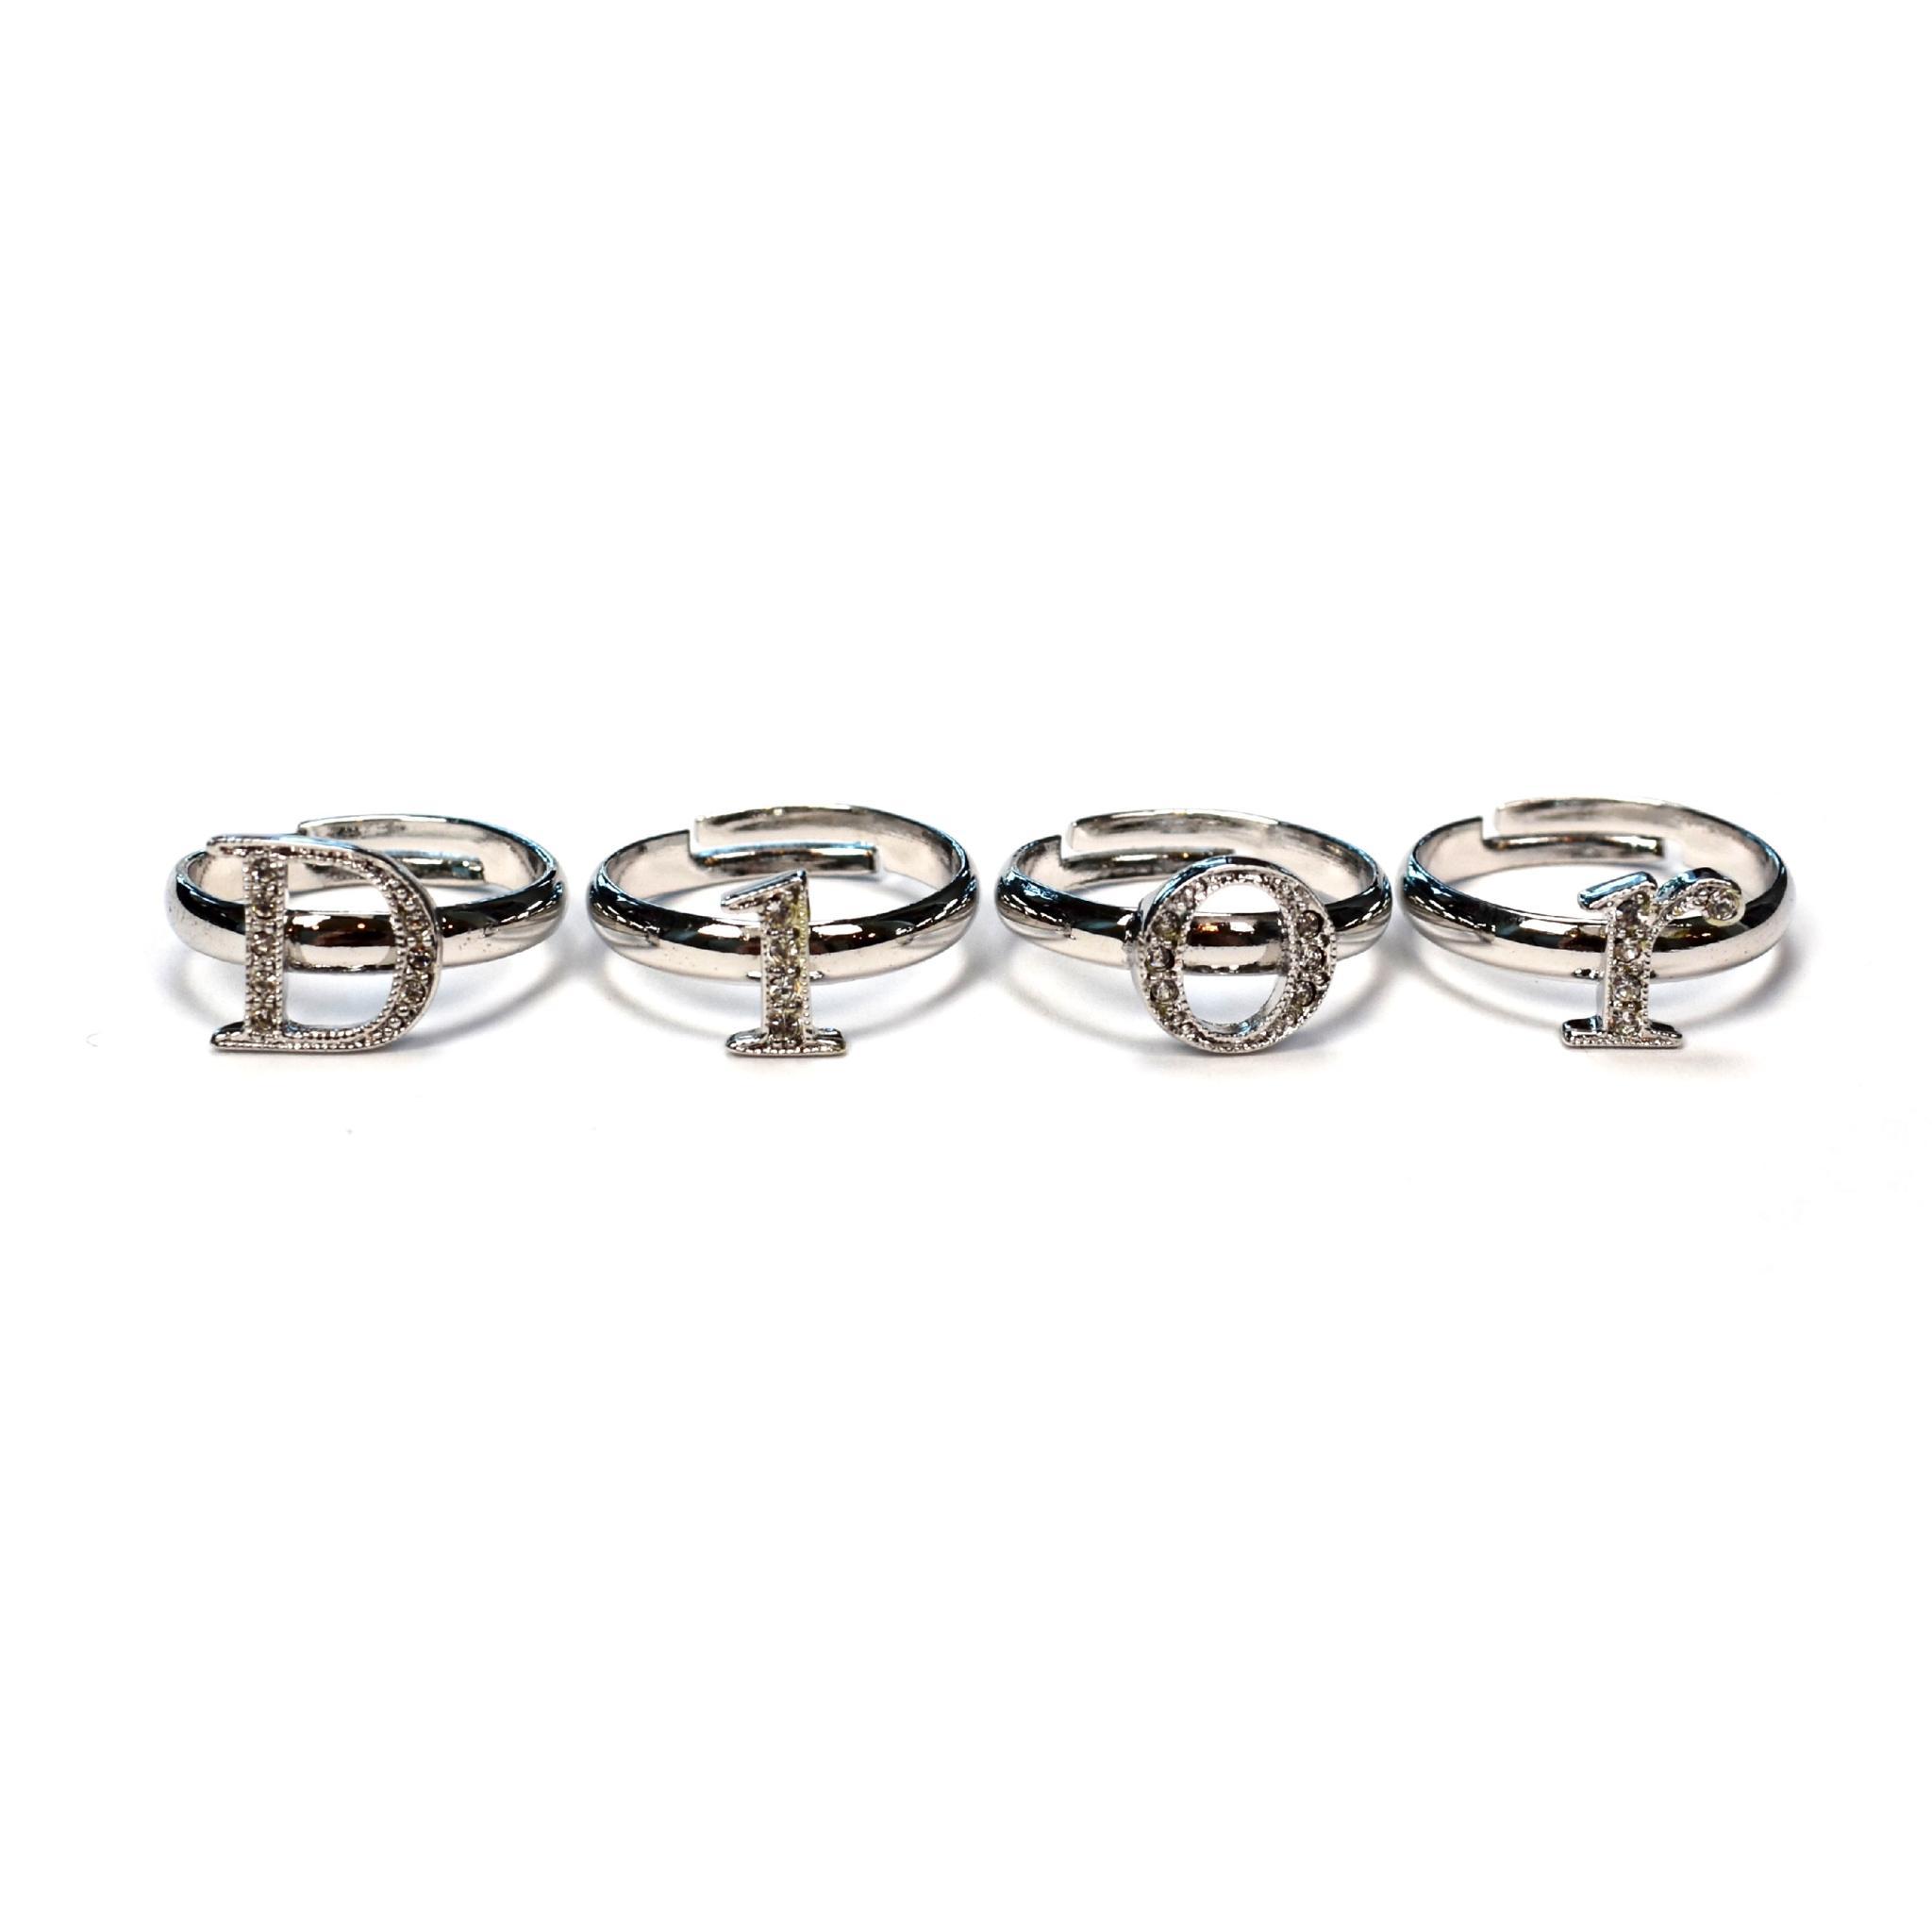 4 Rings Logo - Christian Dior Boutique - Set of 4 Crystal Inset Spell Out Logo ...